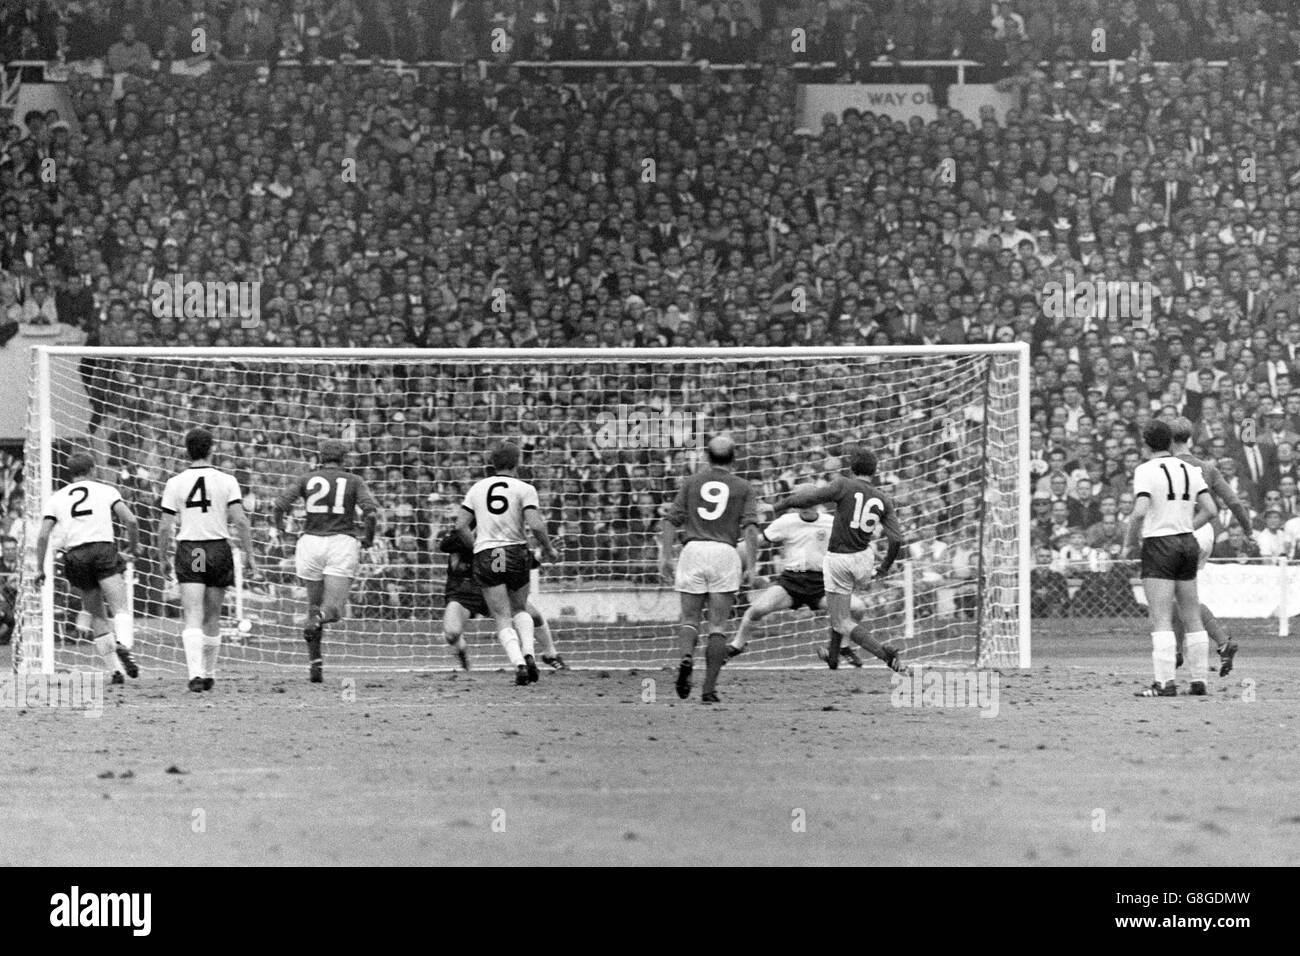 England's Martin Peters (third r) lashes his team's second goal past West Germany goalkeeper Hans Tilkowski (fourth l, hidden), watched by teammates Jack Charlton (r), Bobby Charlton (fifth r) and Roger Hunt (third l), and West Germany's Horst-Dieter Hottges (l), Franz Beckenbauer (second l), Wolfgang Weber (fourth l), Lothar Emmerich (second r) and Karl-Heinz Schnellinger (fourth r) Stock Photo